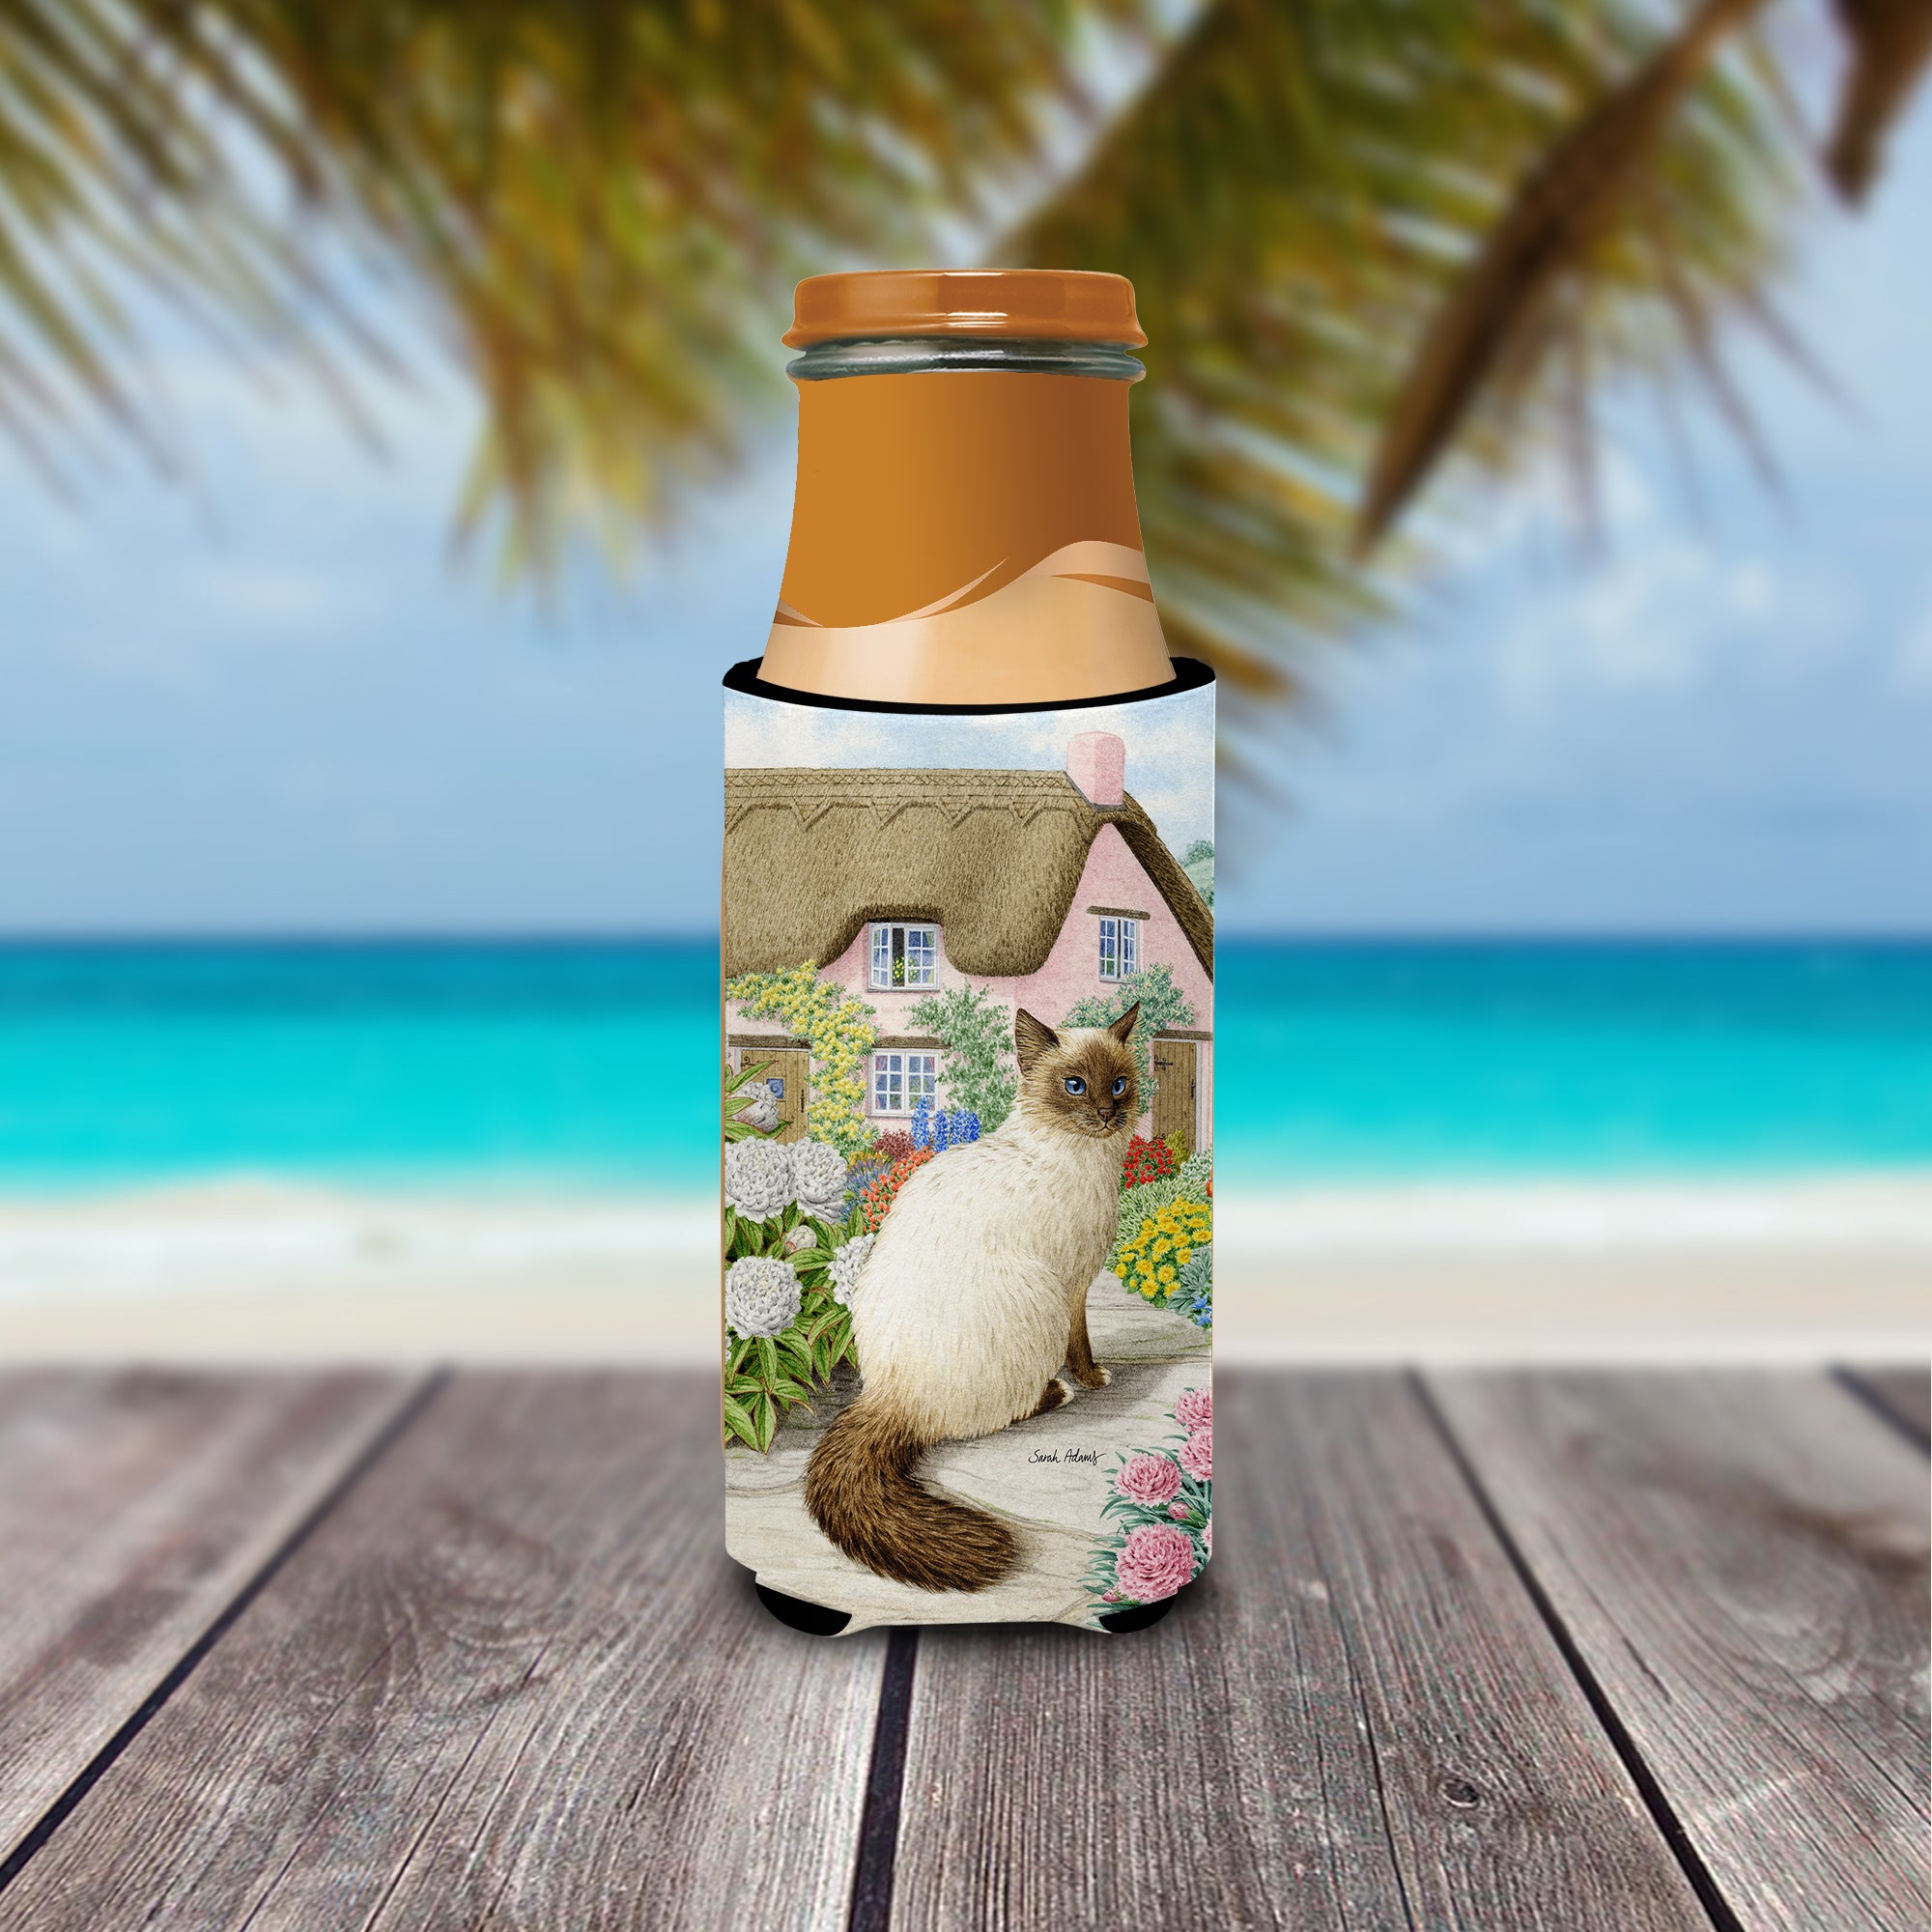 Birman Cat and Cottage Ultra Beverage Insulators for slim cans ASA2086MUK